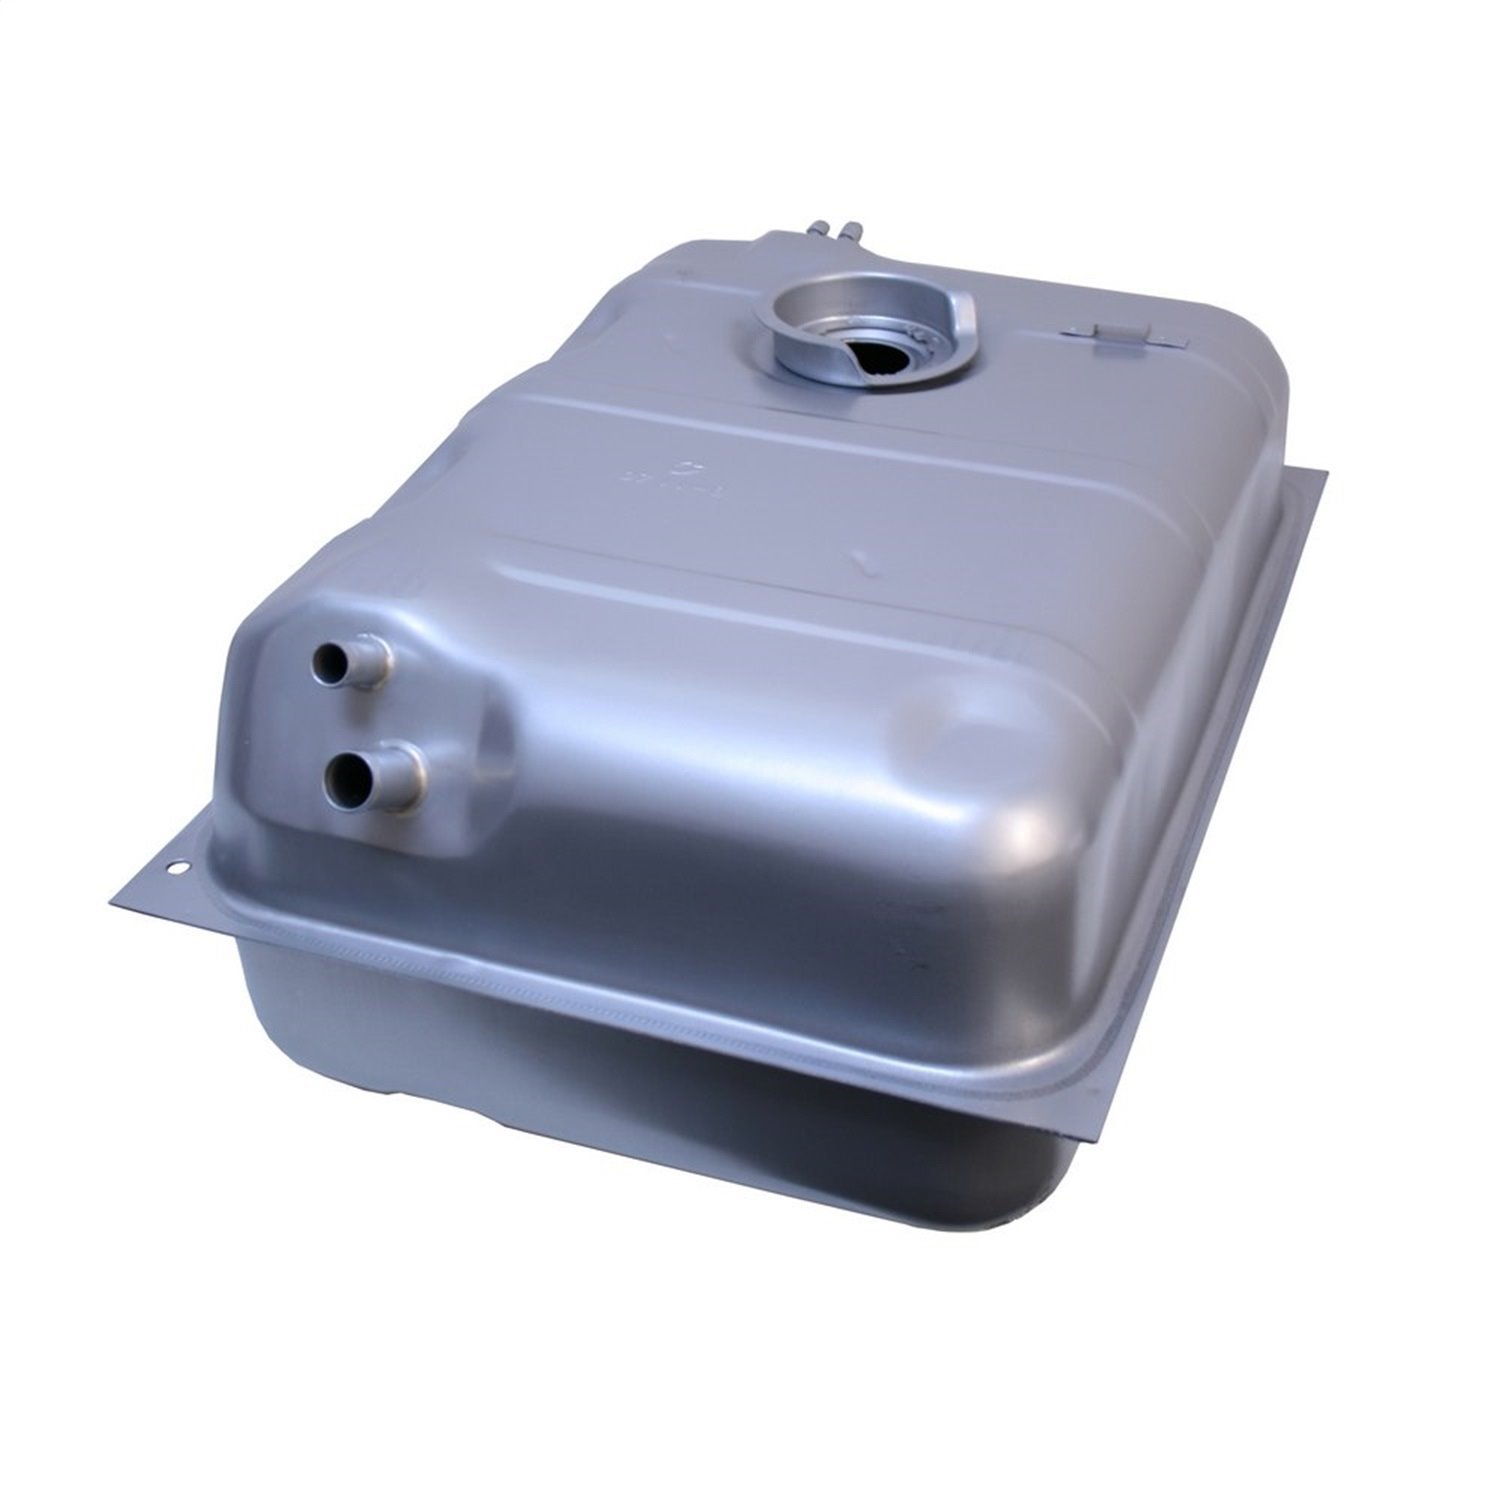 This replacement 15-gallon steel Gas/Fuel tank assembly from Omix-ADA has a 1 inch diameter inlet fi